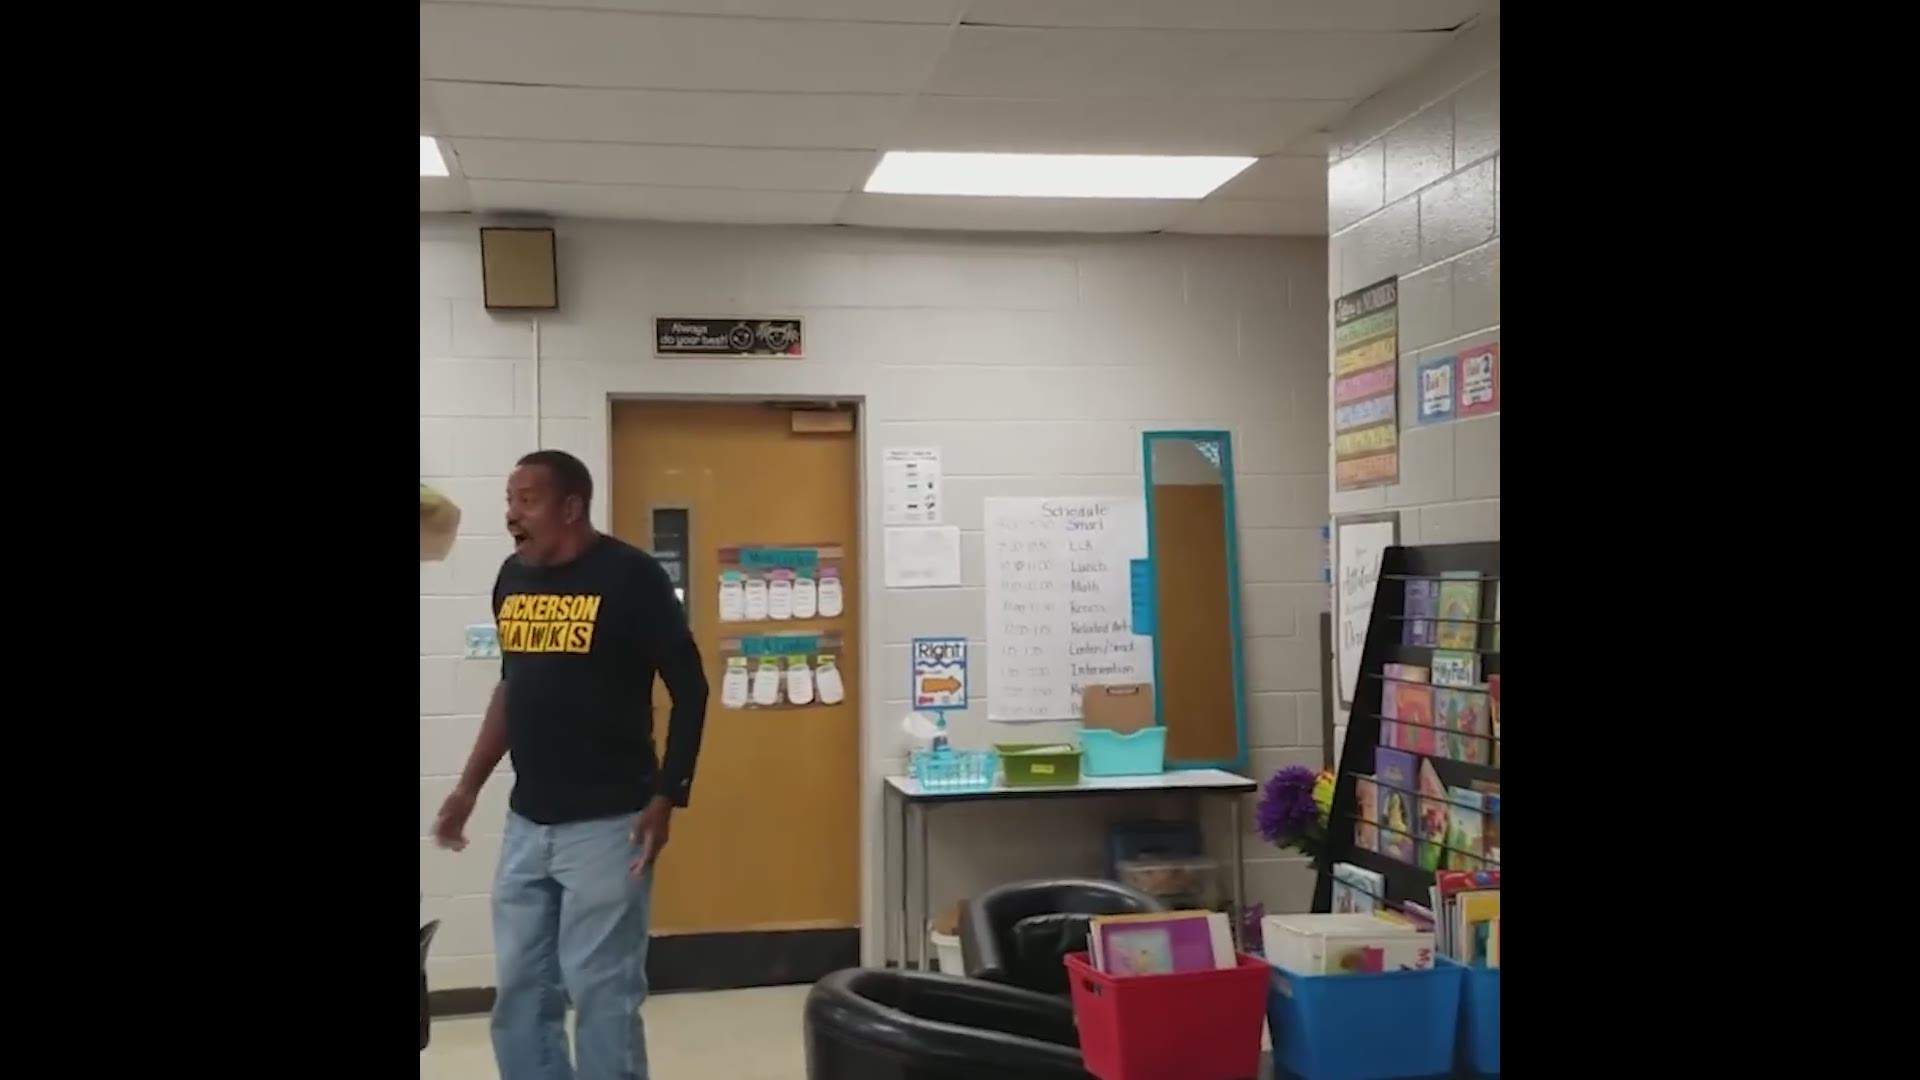 A kindergarten class from Hickerson Elementary School sang to custodian James Anthony by signing "Happy Birthday" to him for his 60th birthday. While he's hearing impaired, he can read lips.